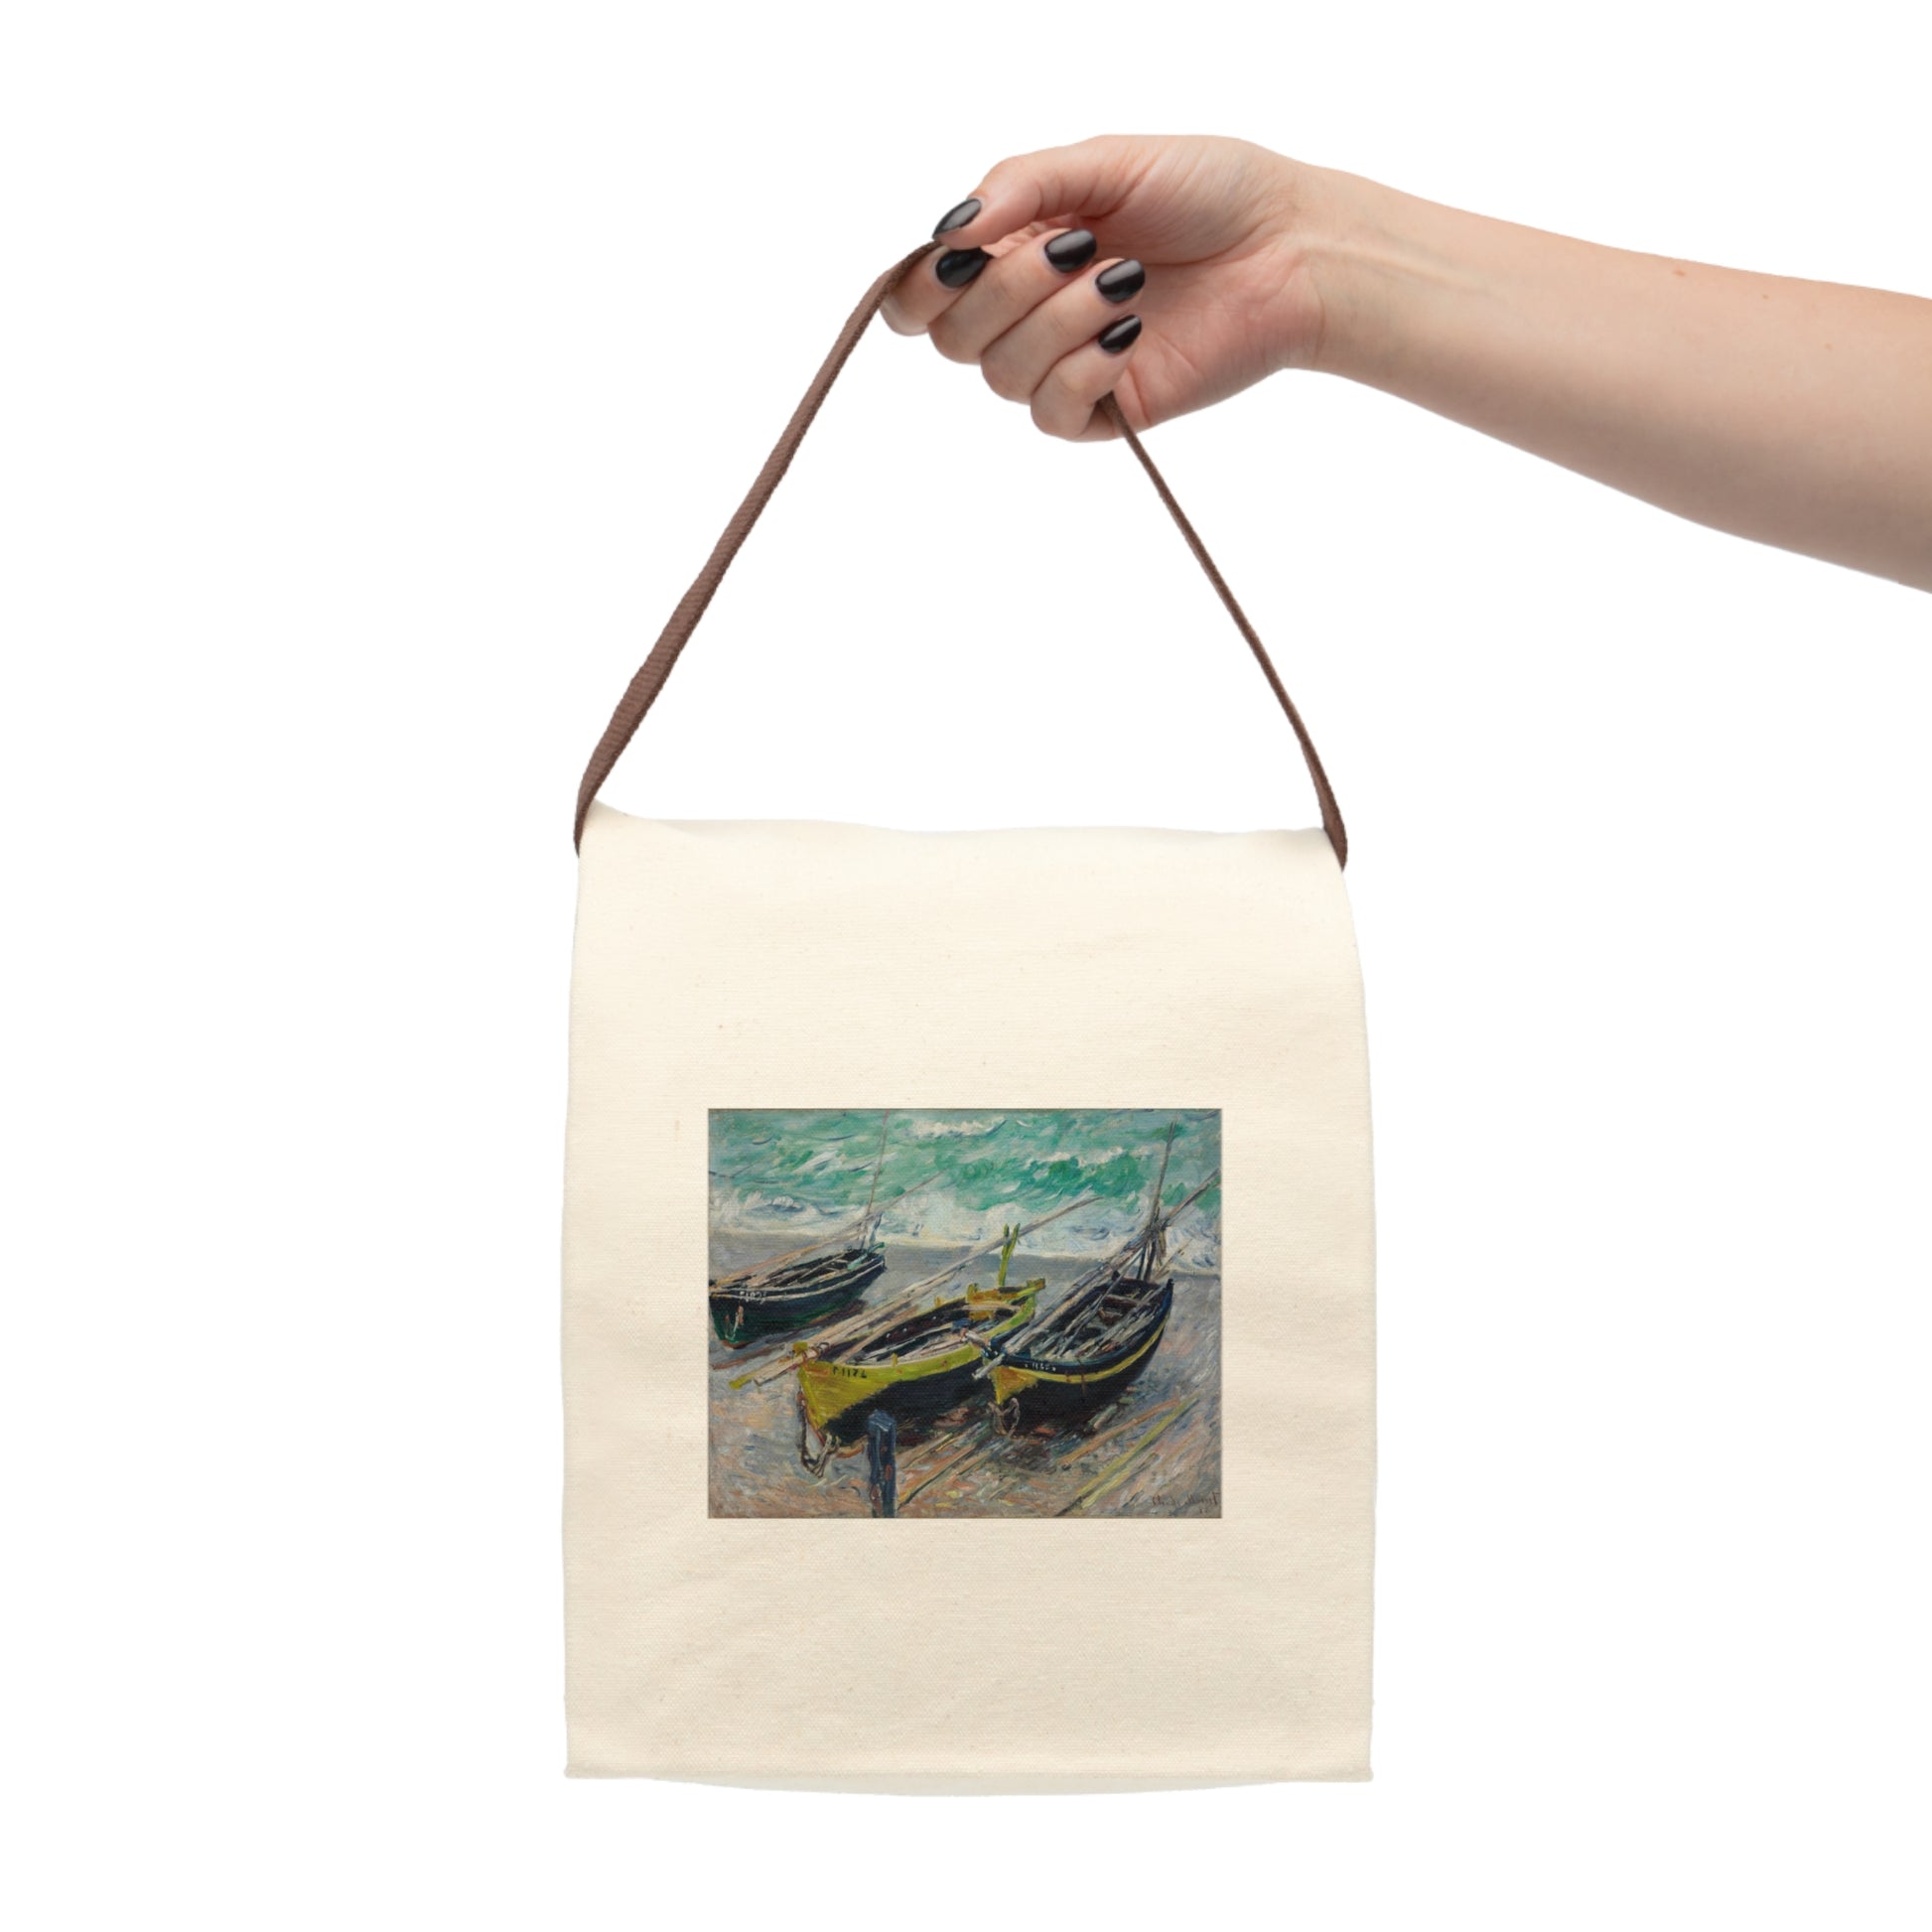 CLAUDE MONET - THREE FISHING BOATS - COTTON CANVAS LUNCH BAG WITH STRAP